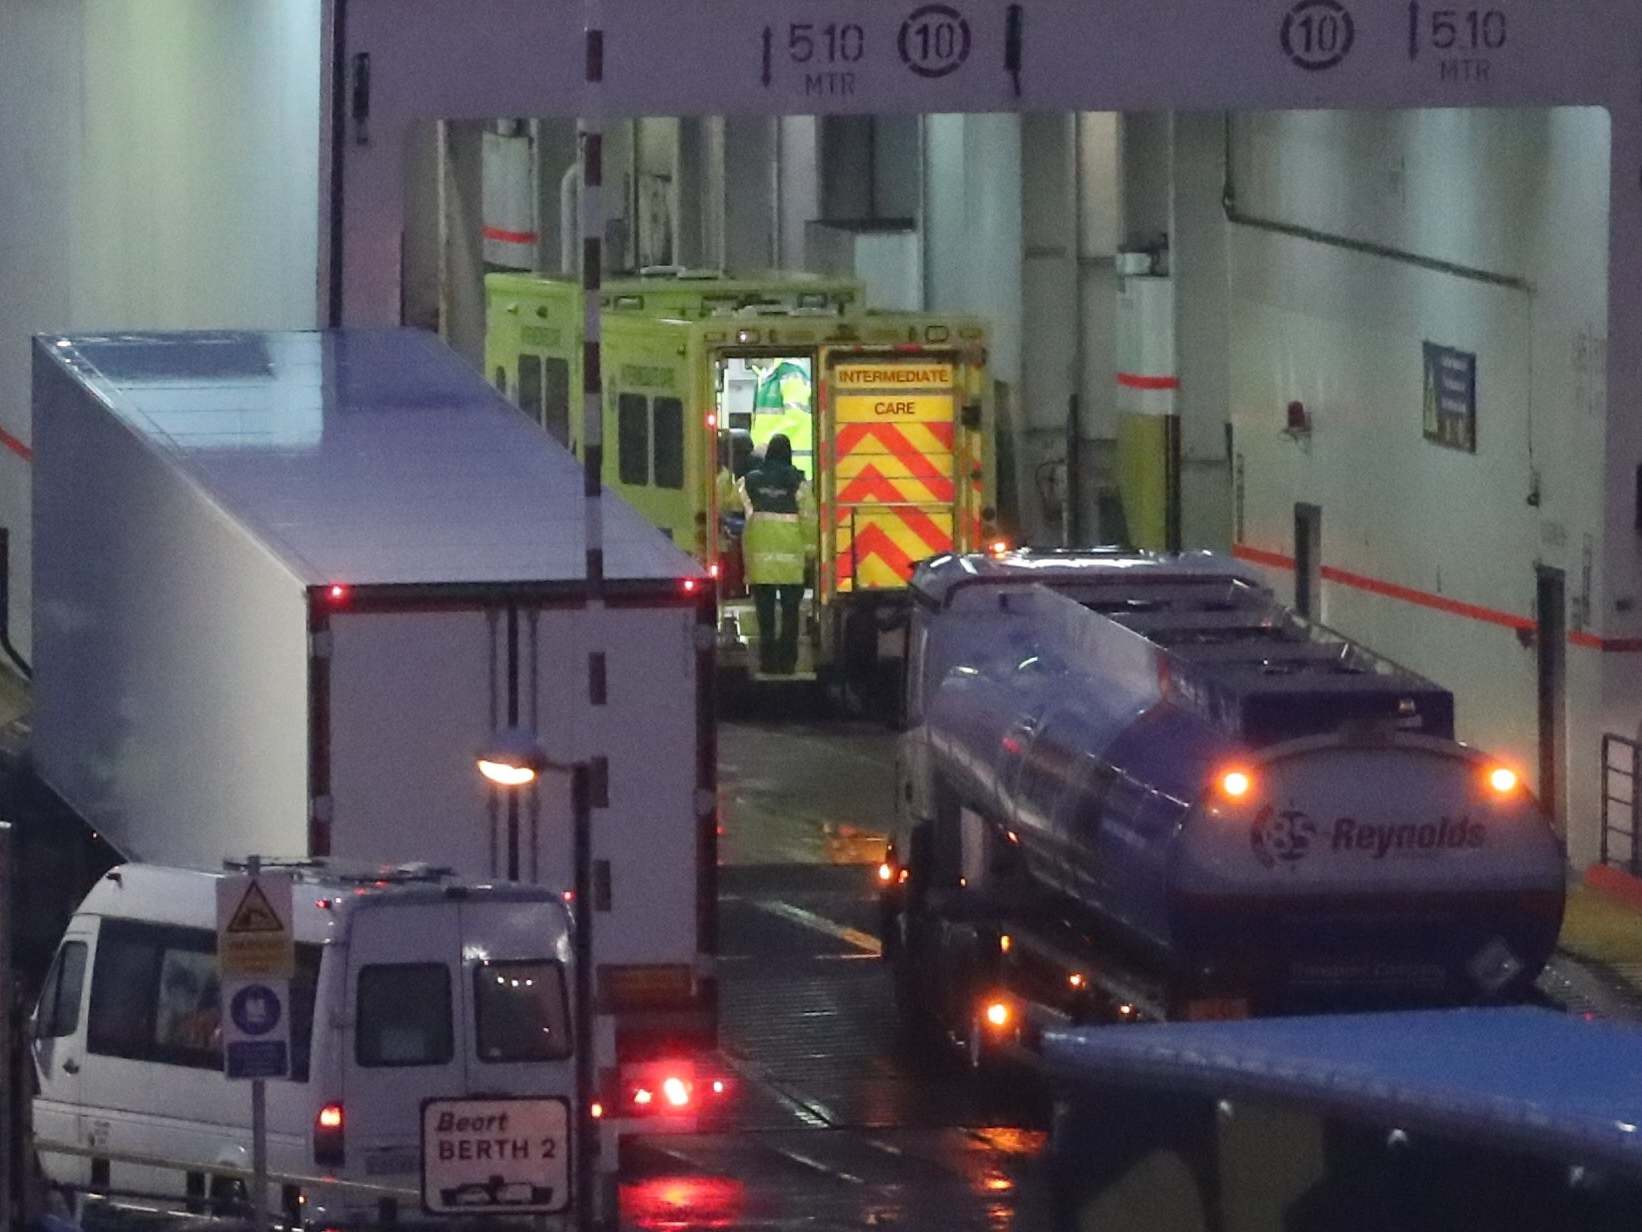 Emergency personnel at Rosslare Europort in Co Wexford, board the Stena Line ferry after 16 people were discovered in a sealed trailer on the ship sailing from France